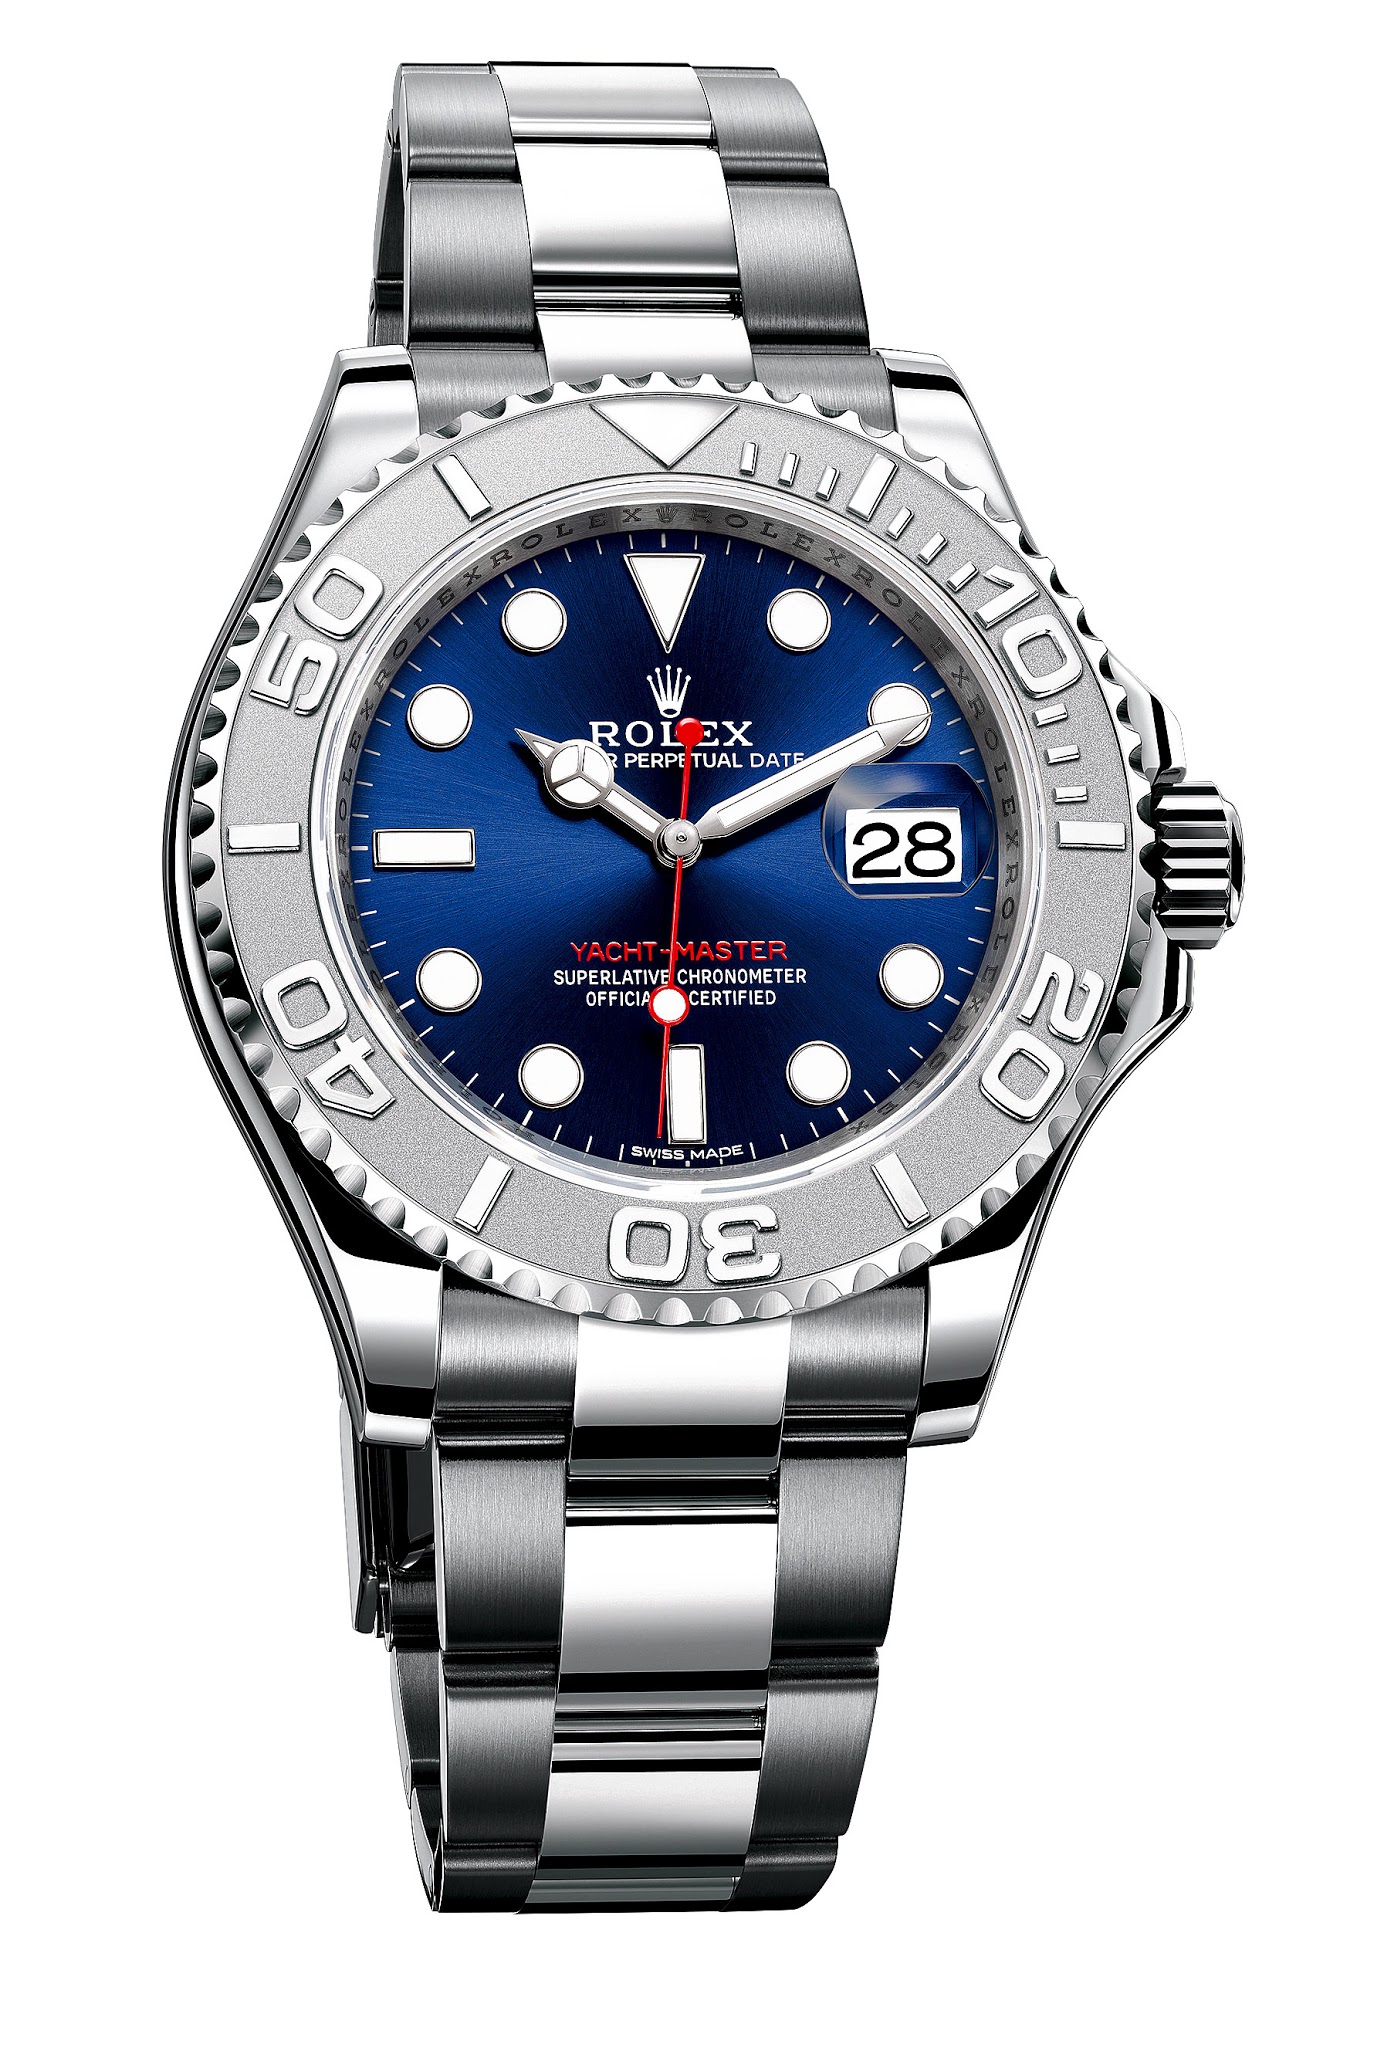 Welcome to RolexMagazine.com...Home of Jake's Rolex World Magazine..Optimized for iPad and iPhone: Rolex Submariner Prototype Sells More $600,000